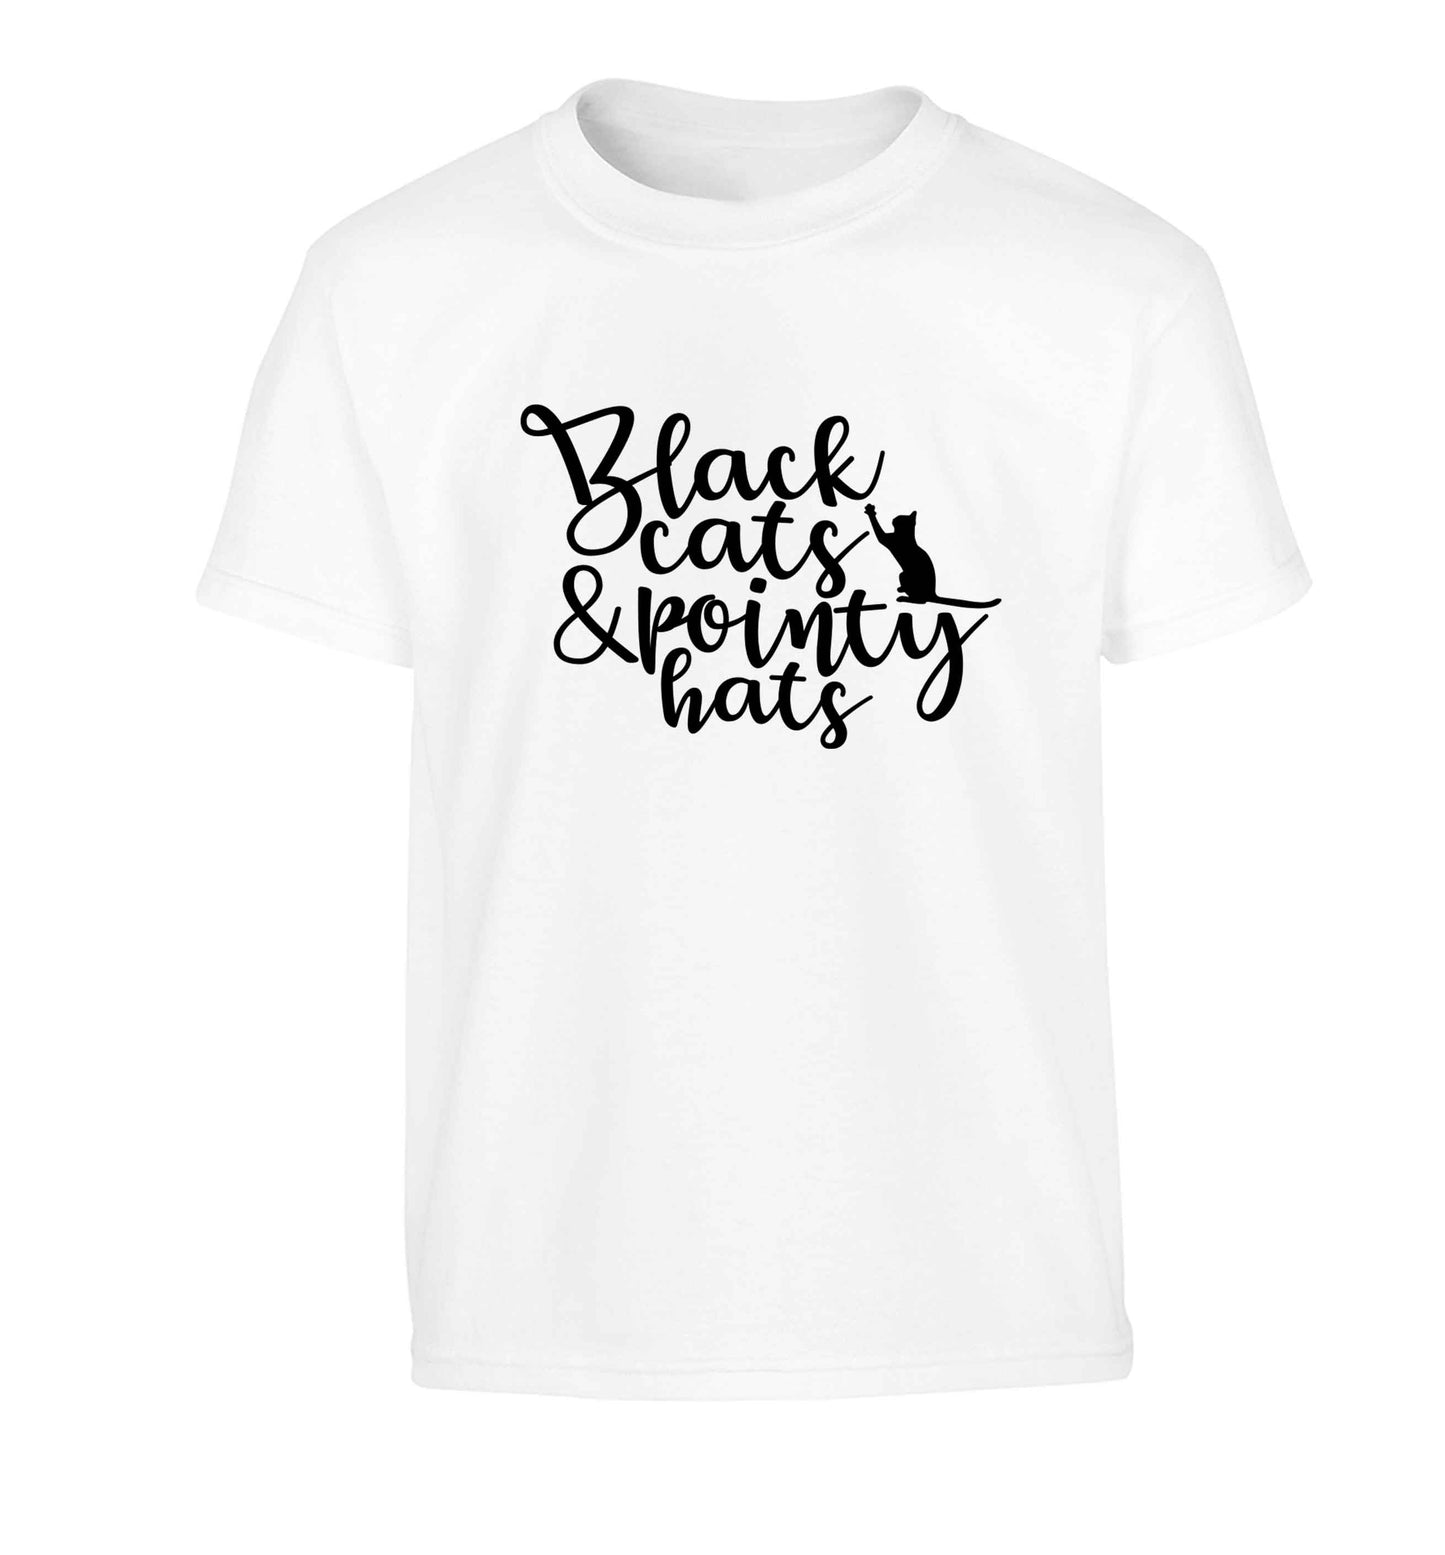 Black cats and pointy hats Children's white Tshirt 12-13 Years